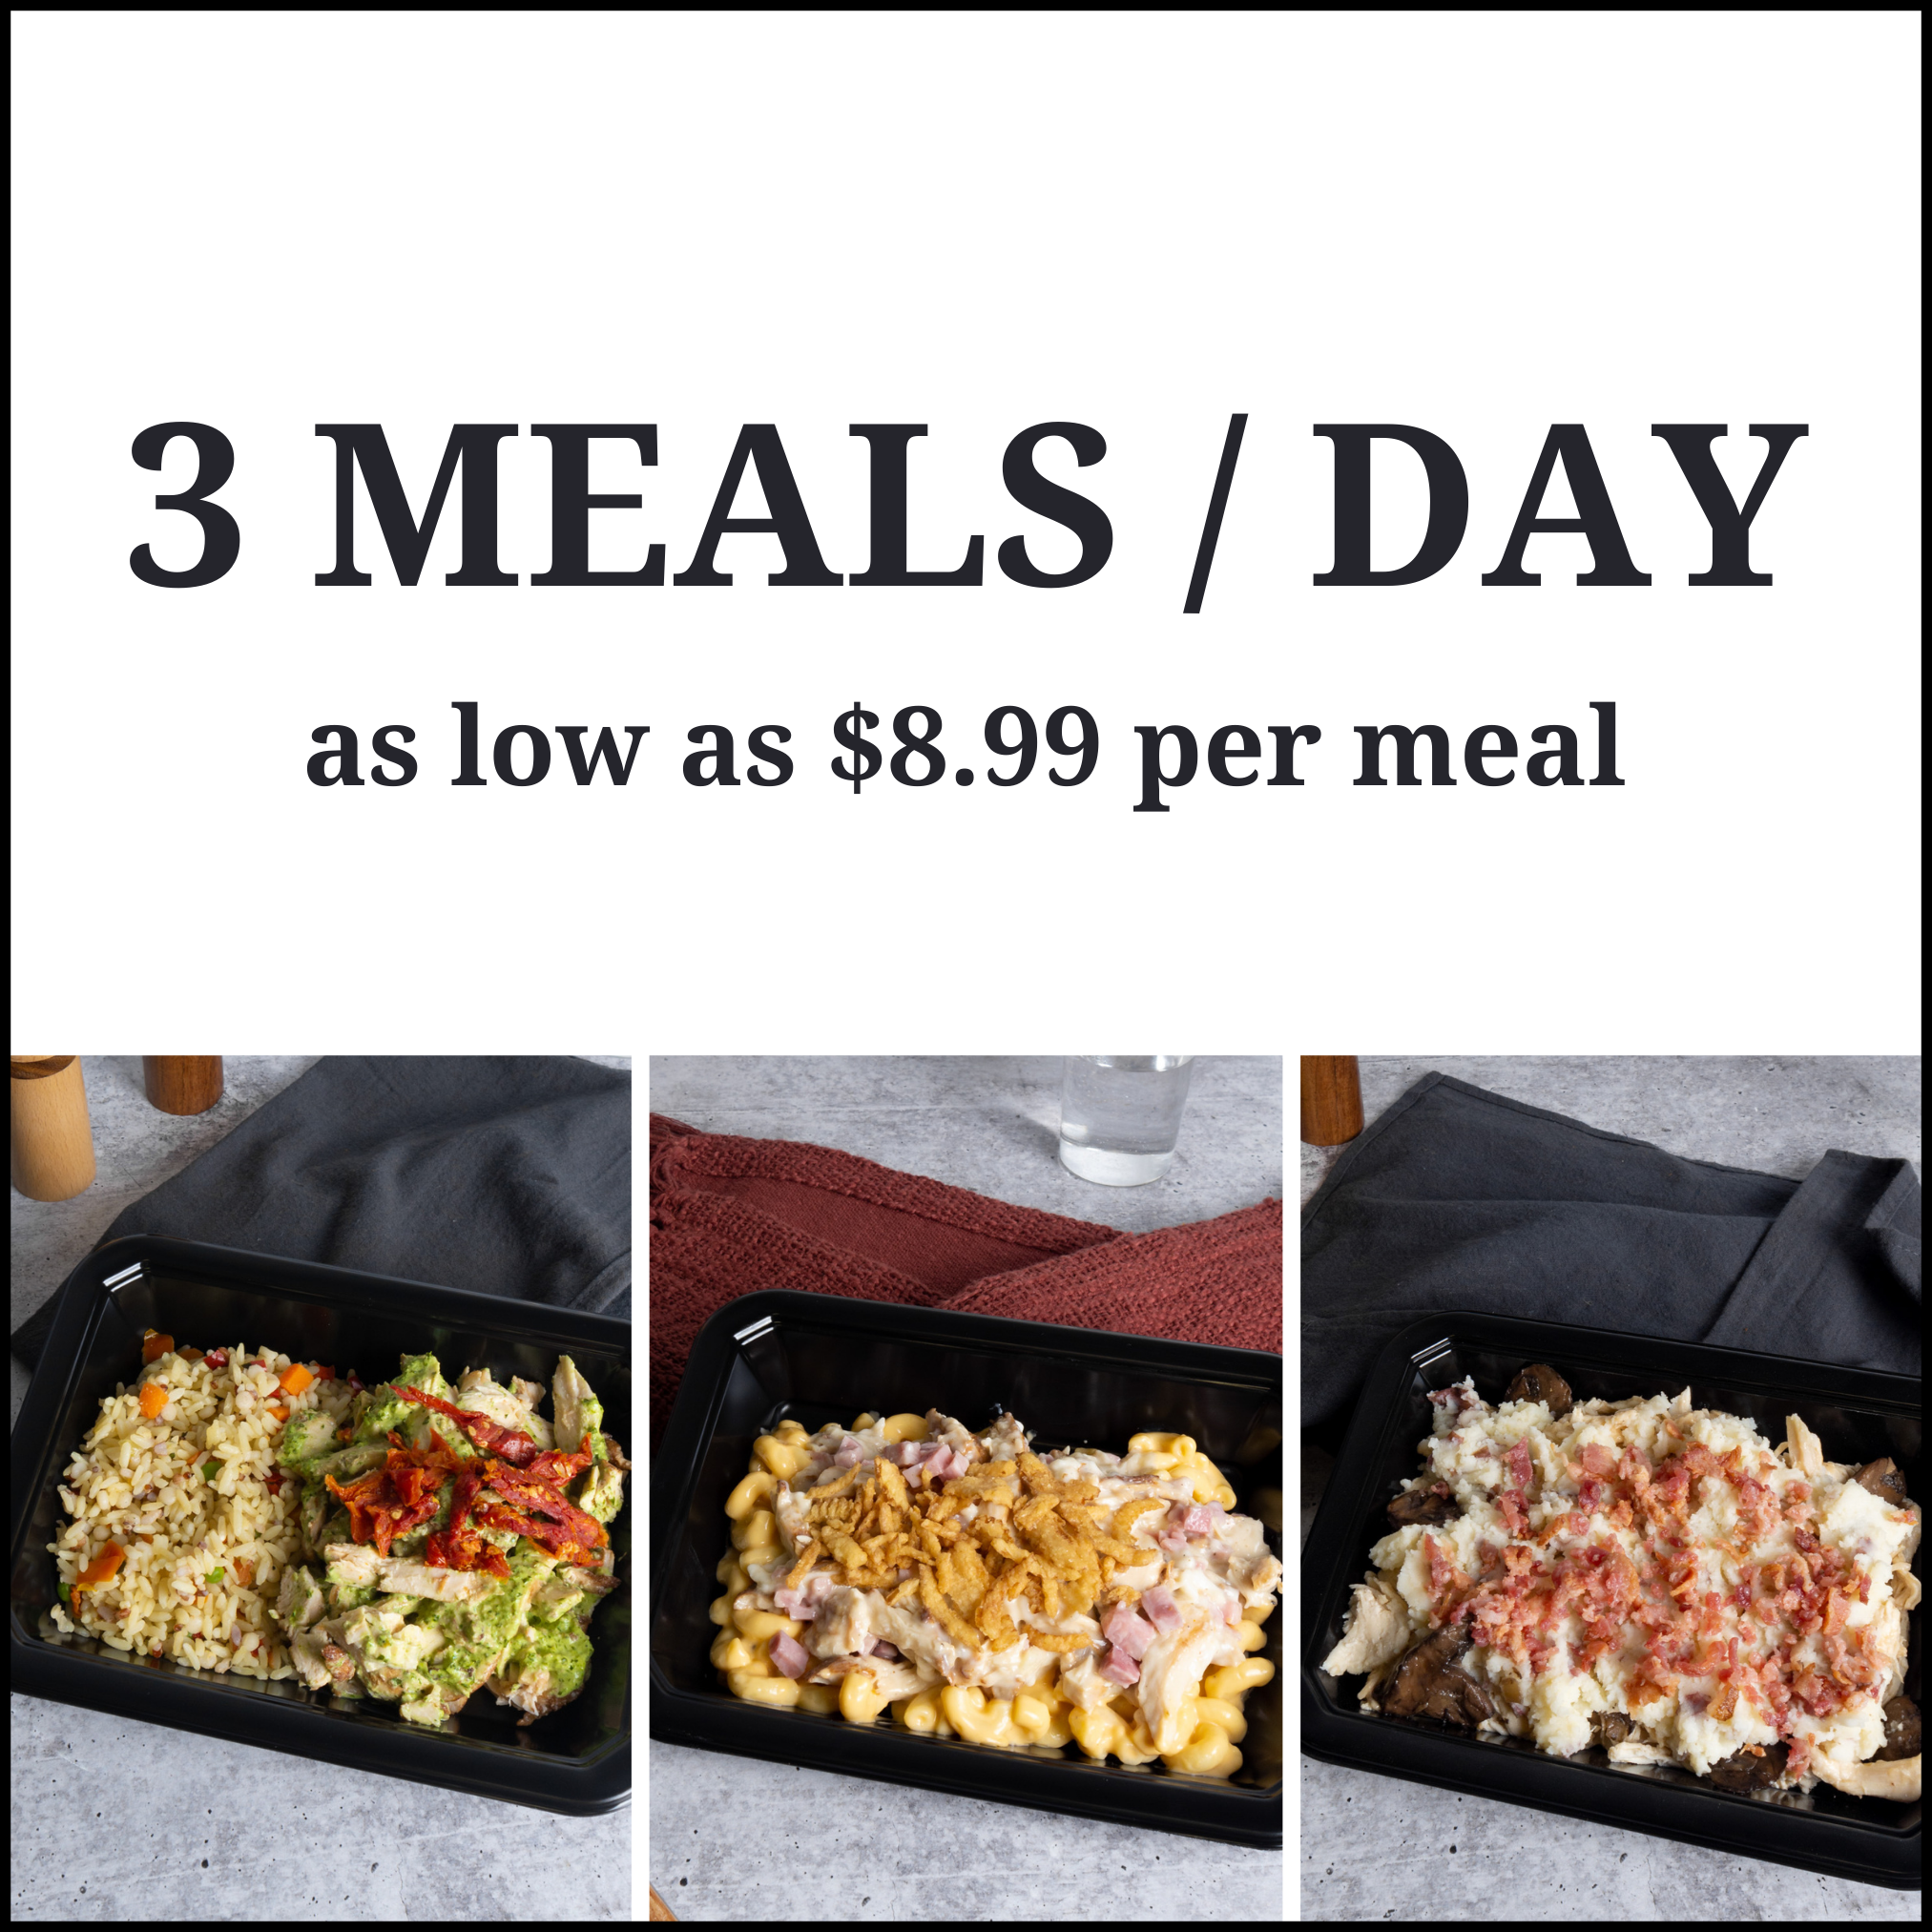 Mon - 3 Meals / Day